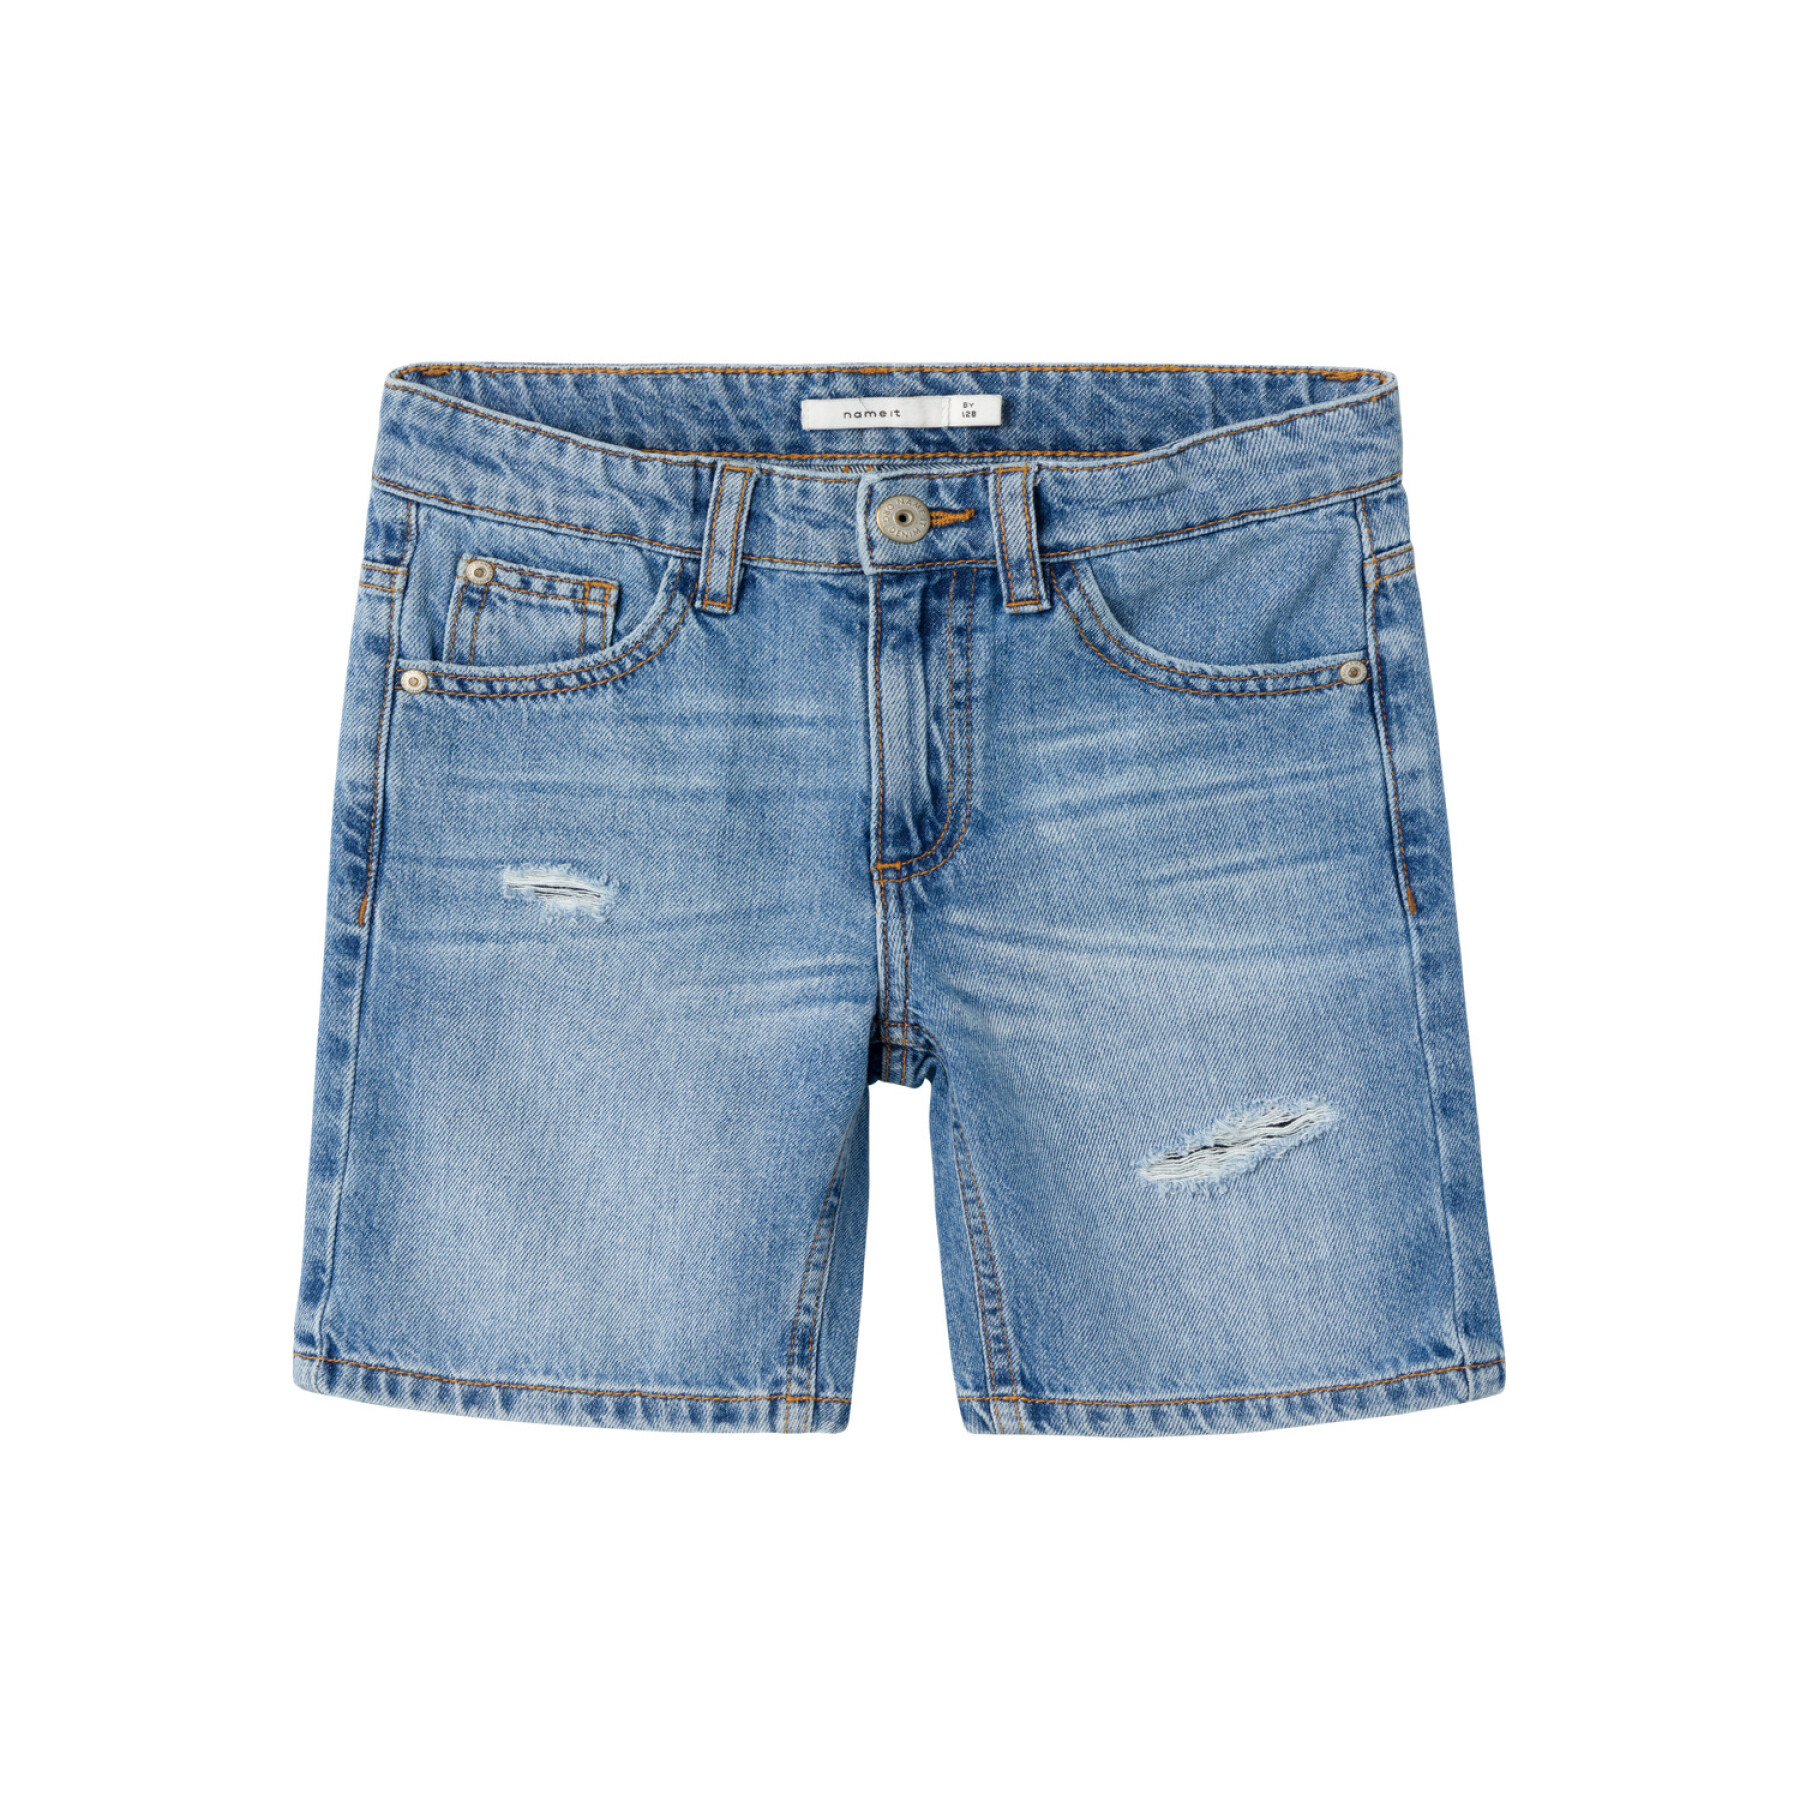 Shorts für Kinder Name it Silas 7998-BE